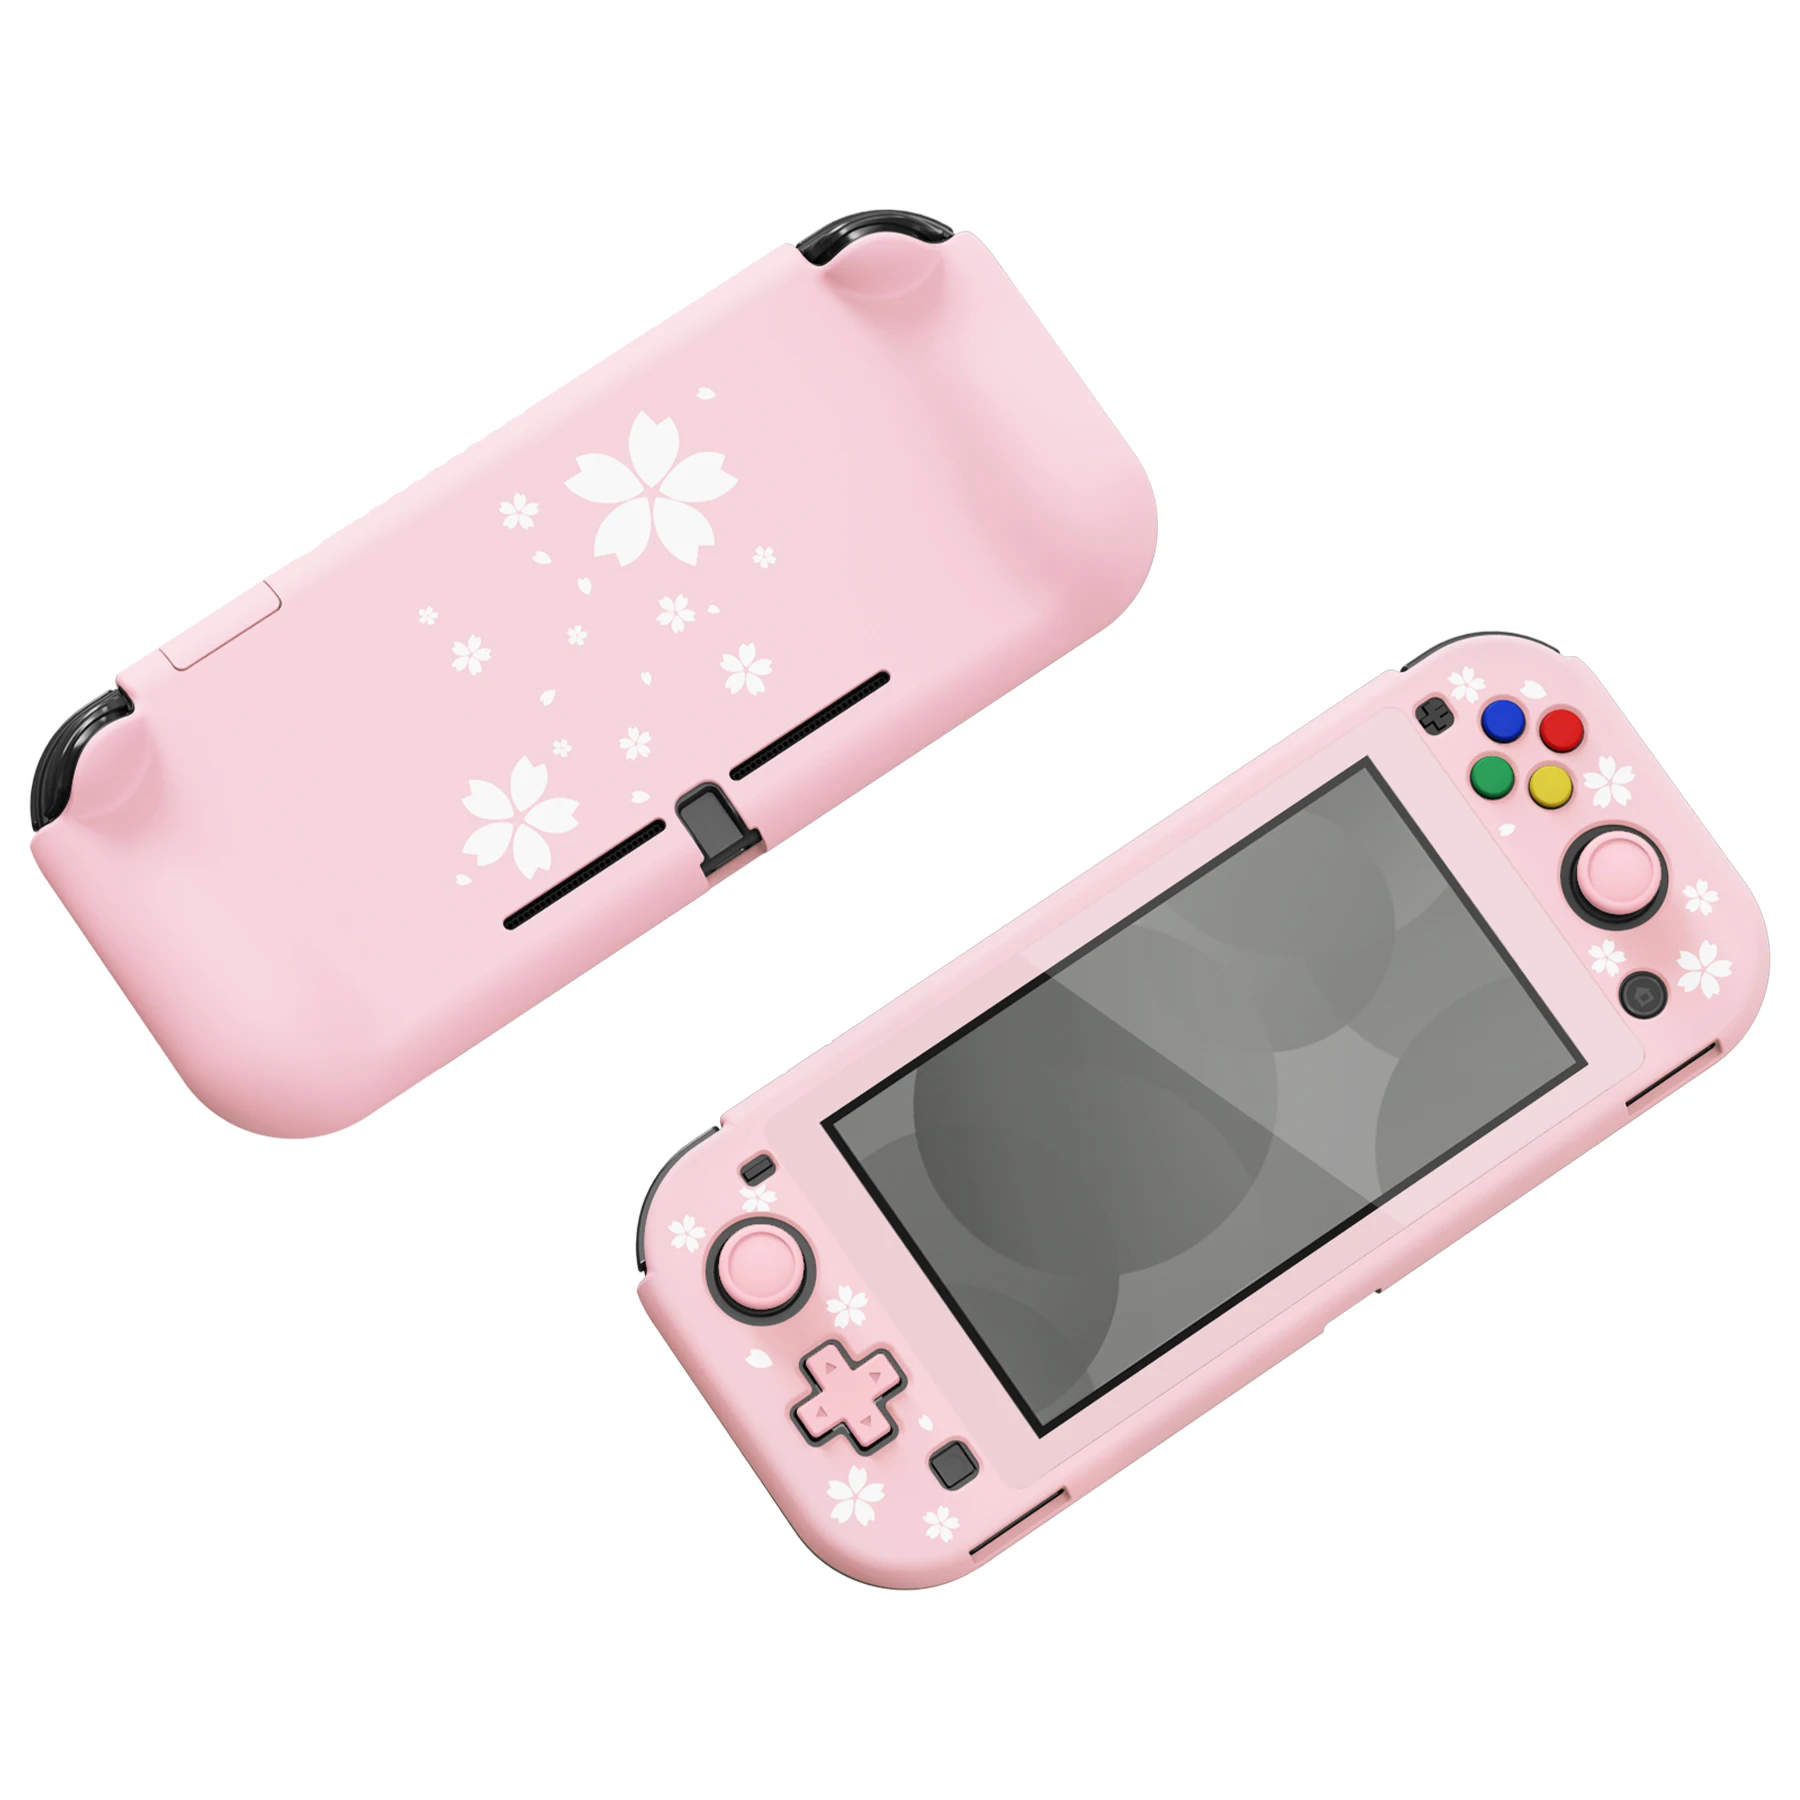 PlayVital ZealProtect Ergonomic Protective Case for Nintendo Switch Lite W/Screen Protector - Cherry Blossoms Petals